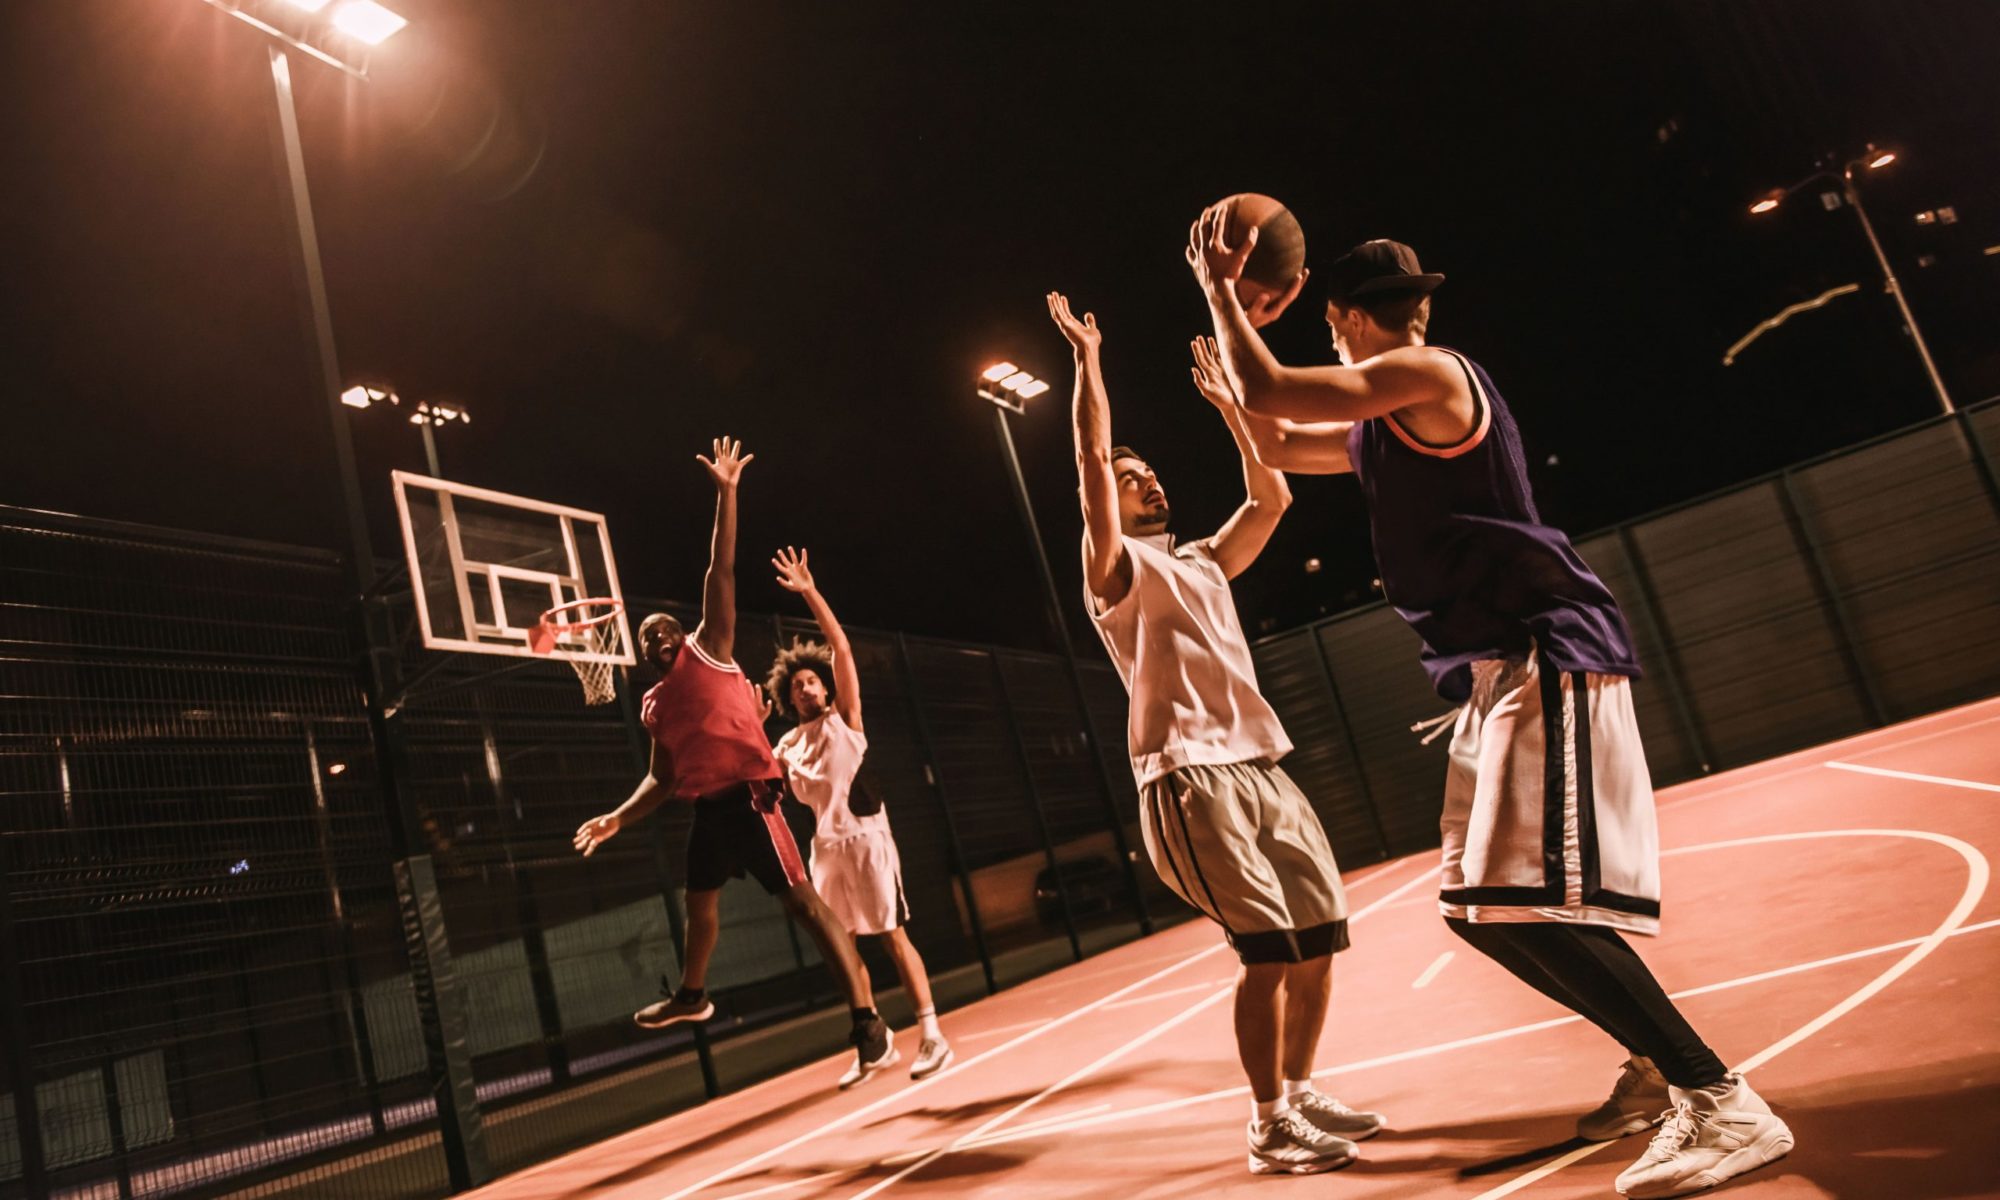 Young male adults playing basketball outside at night